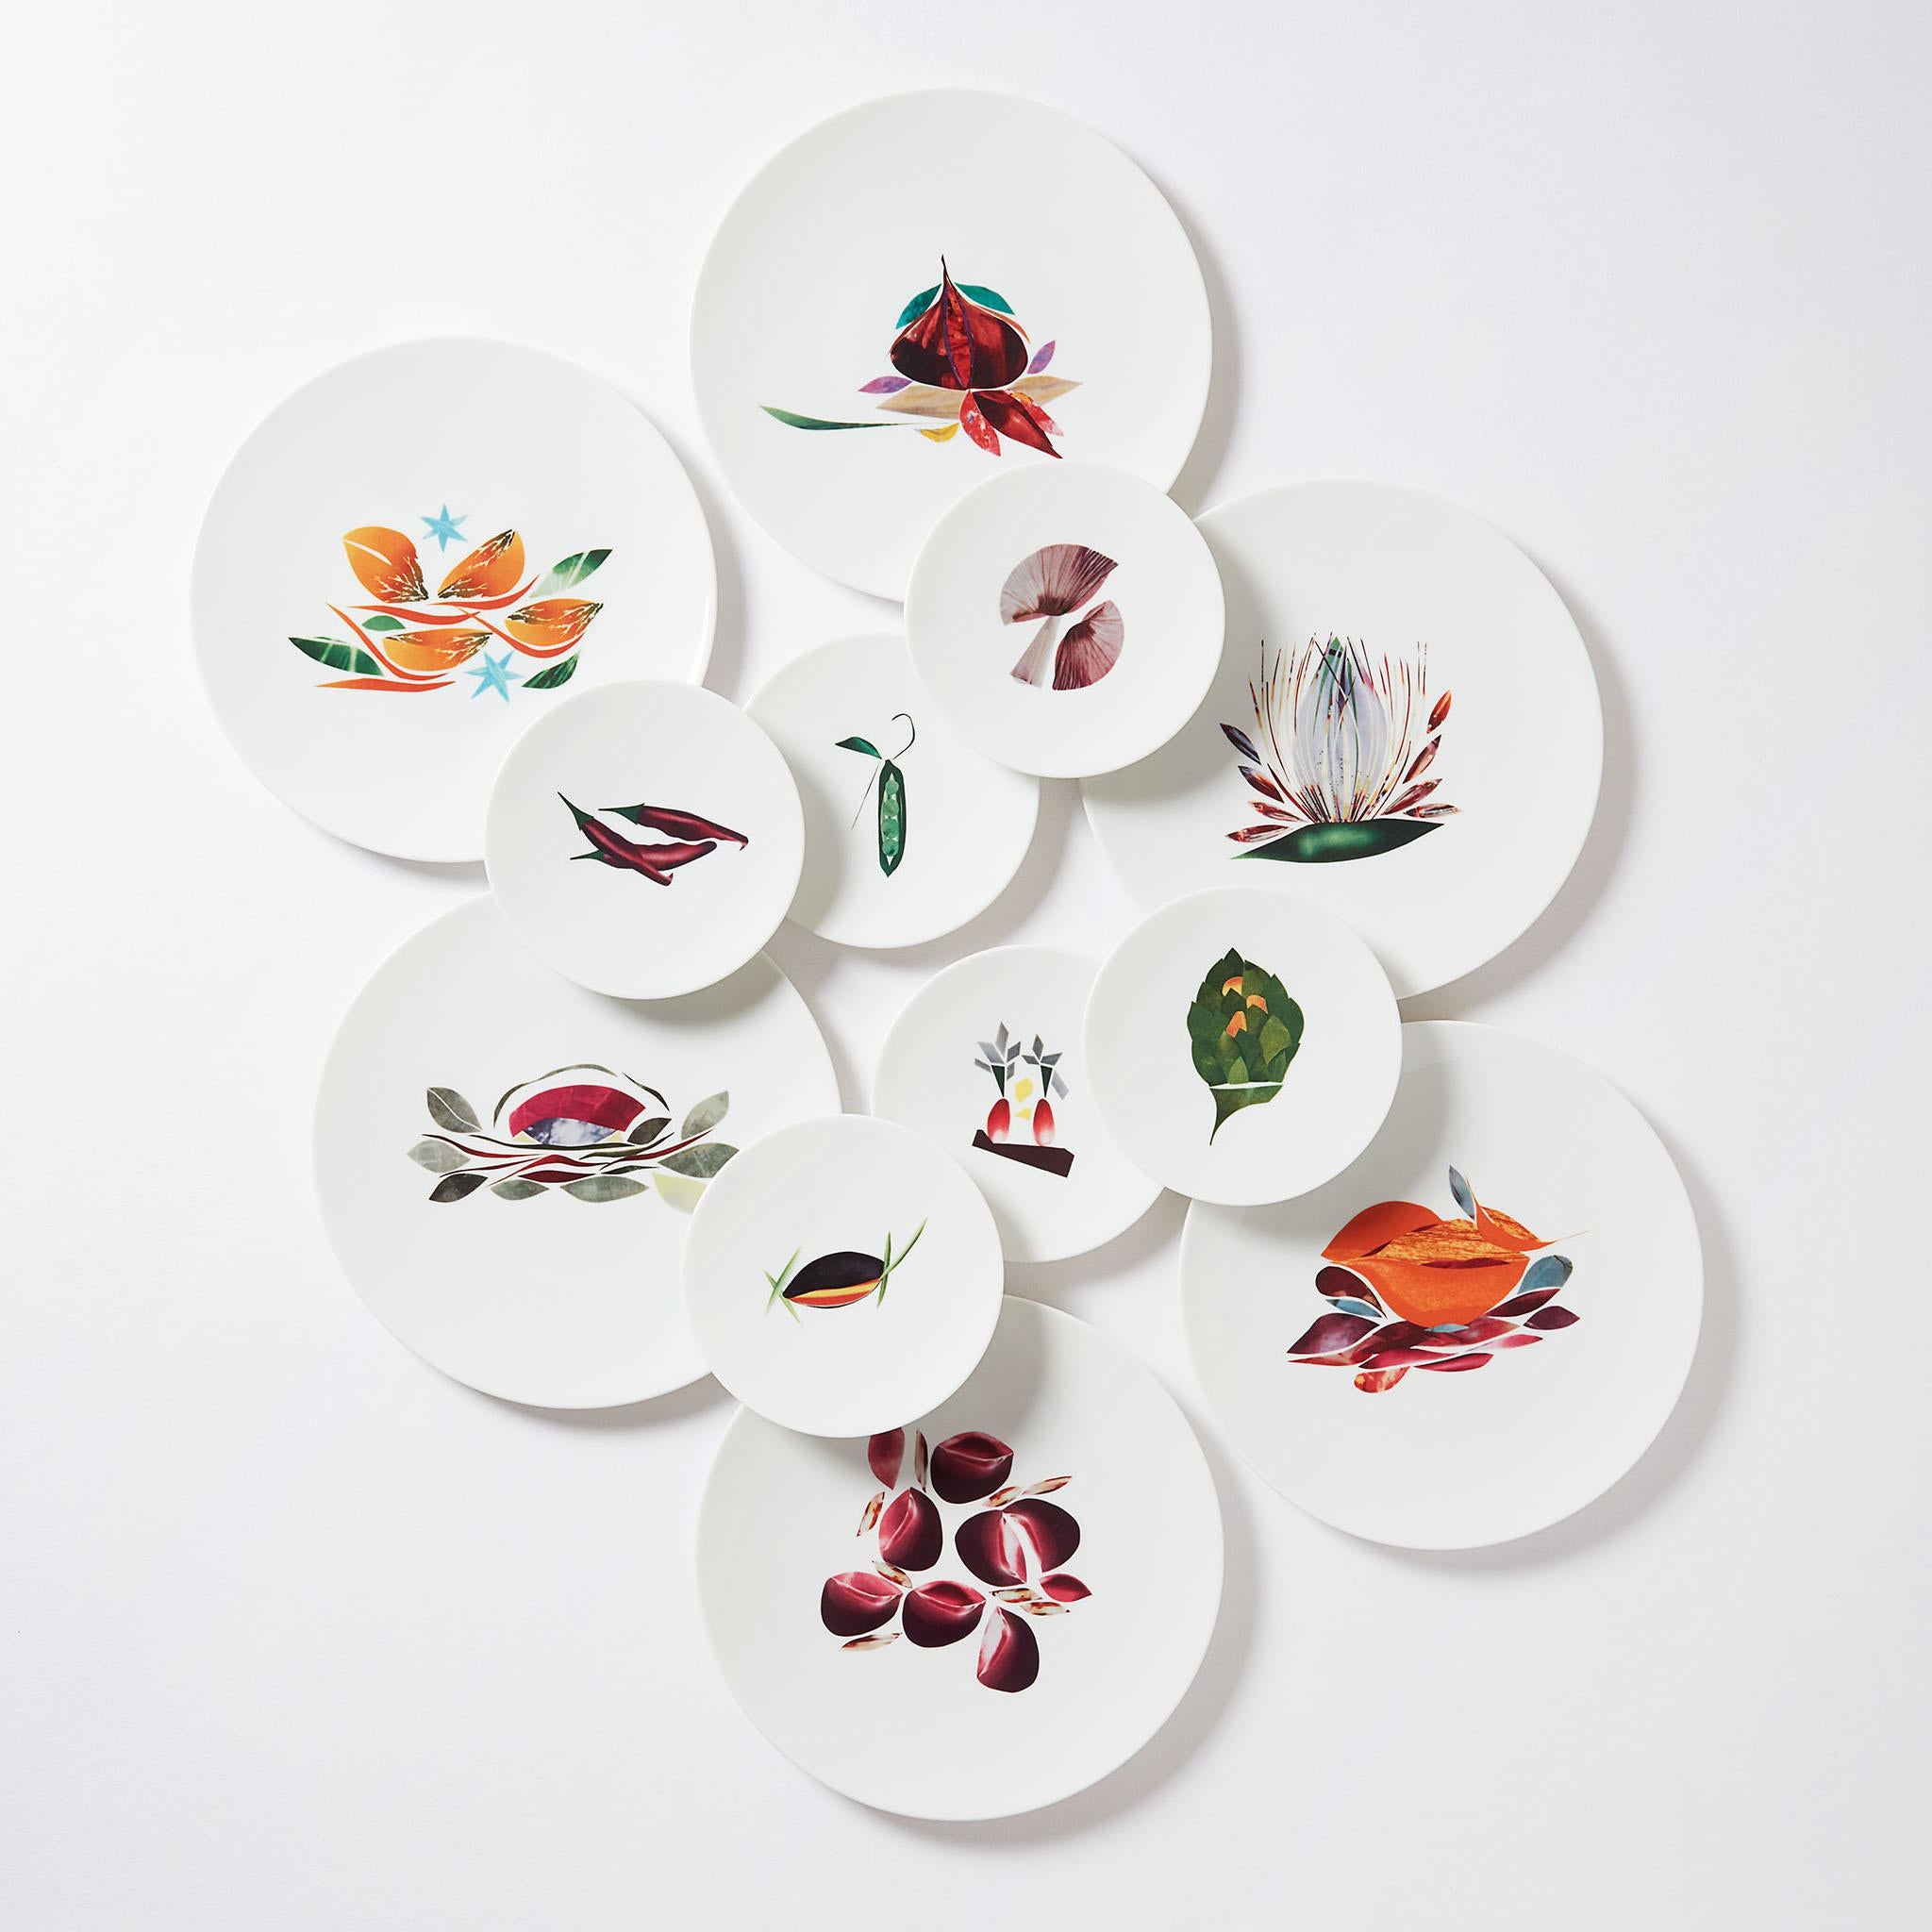 Dinner Porcelain Plate by the French Chef Alain Passard Model 